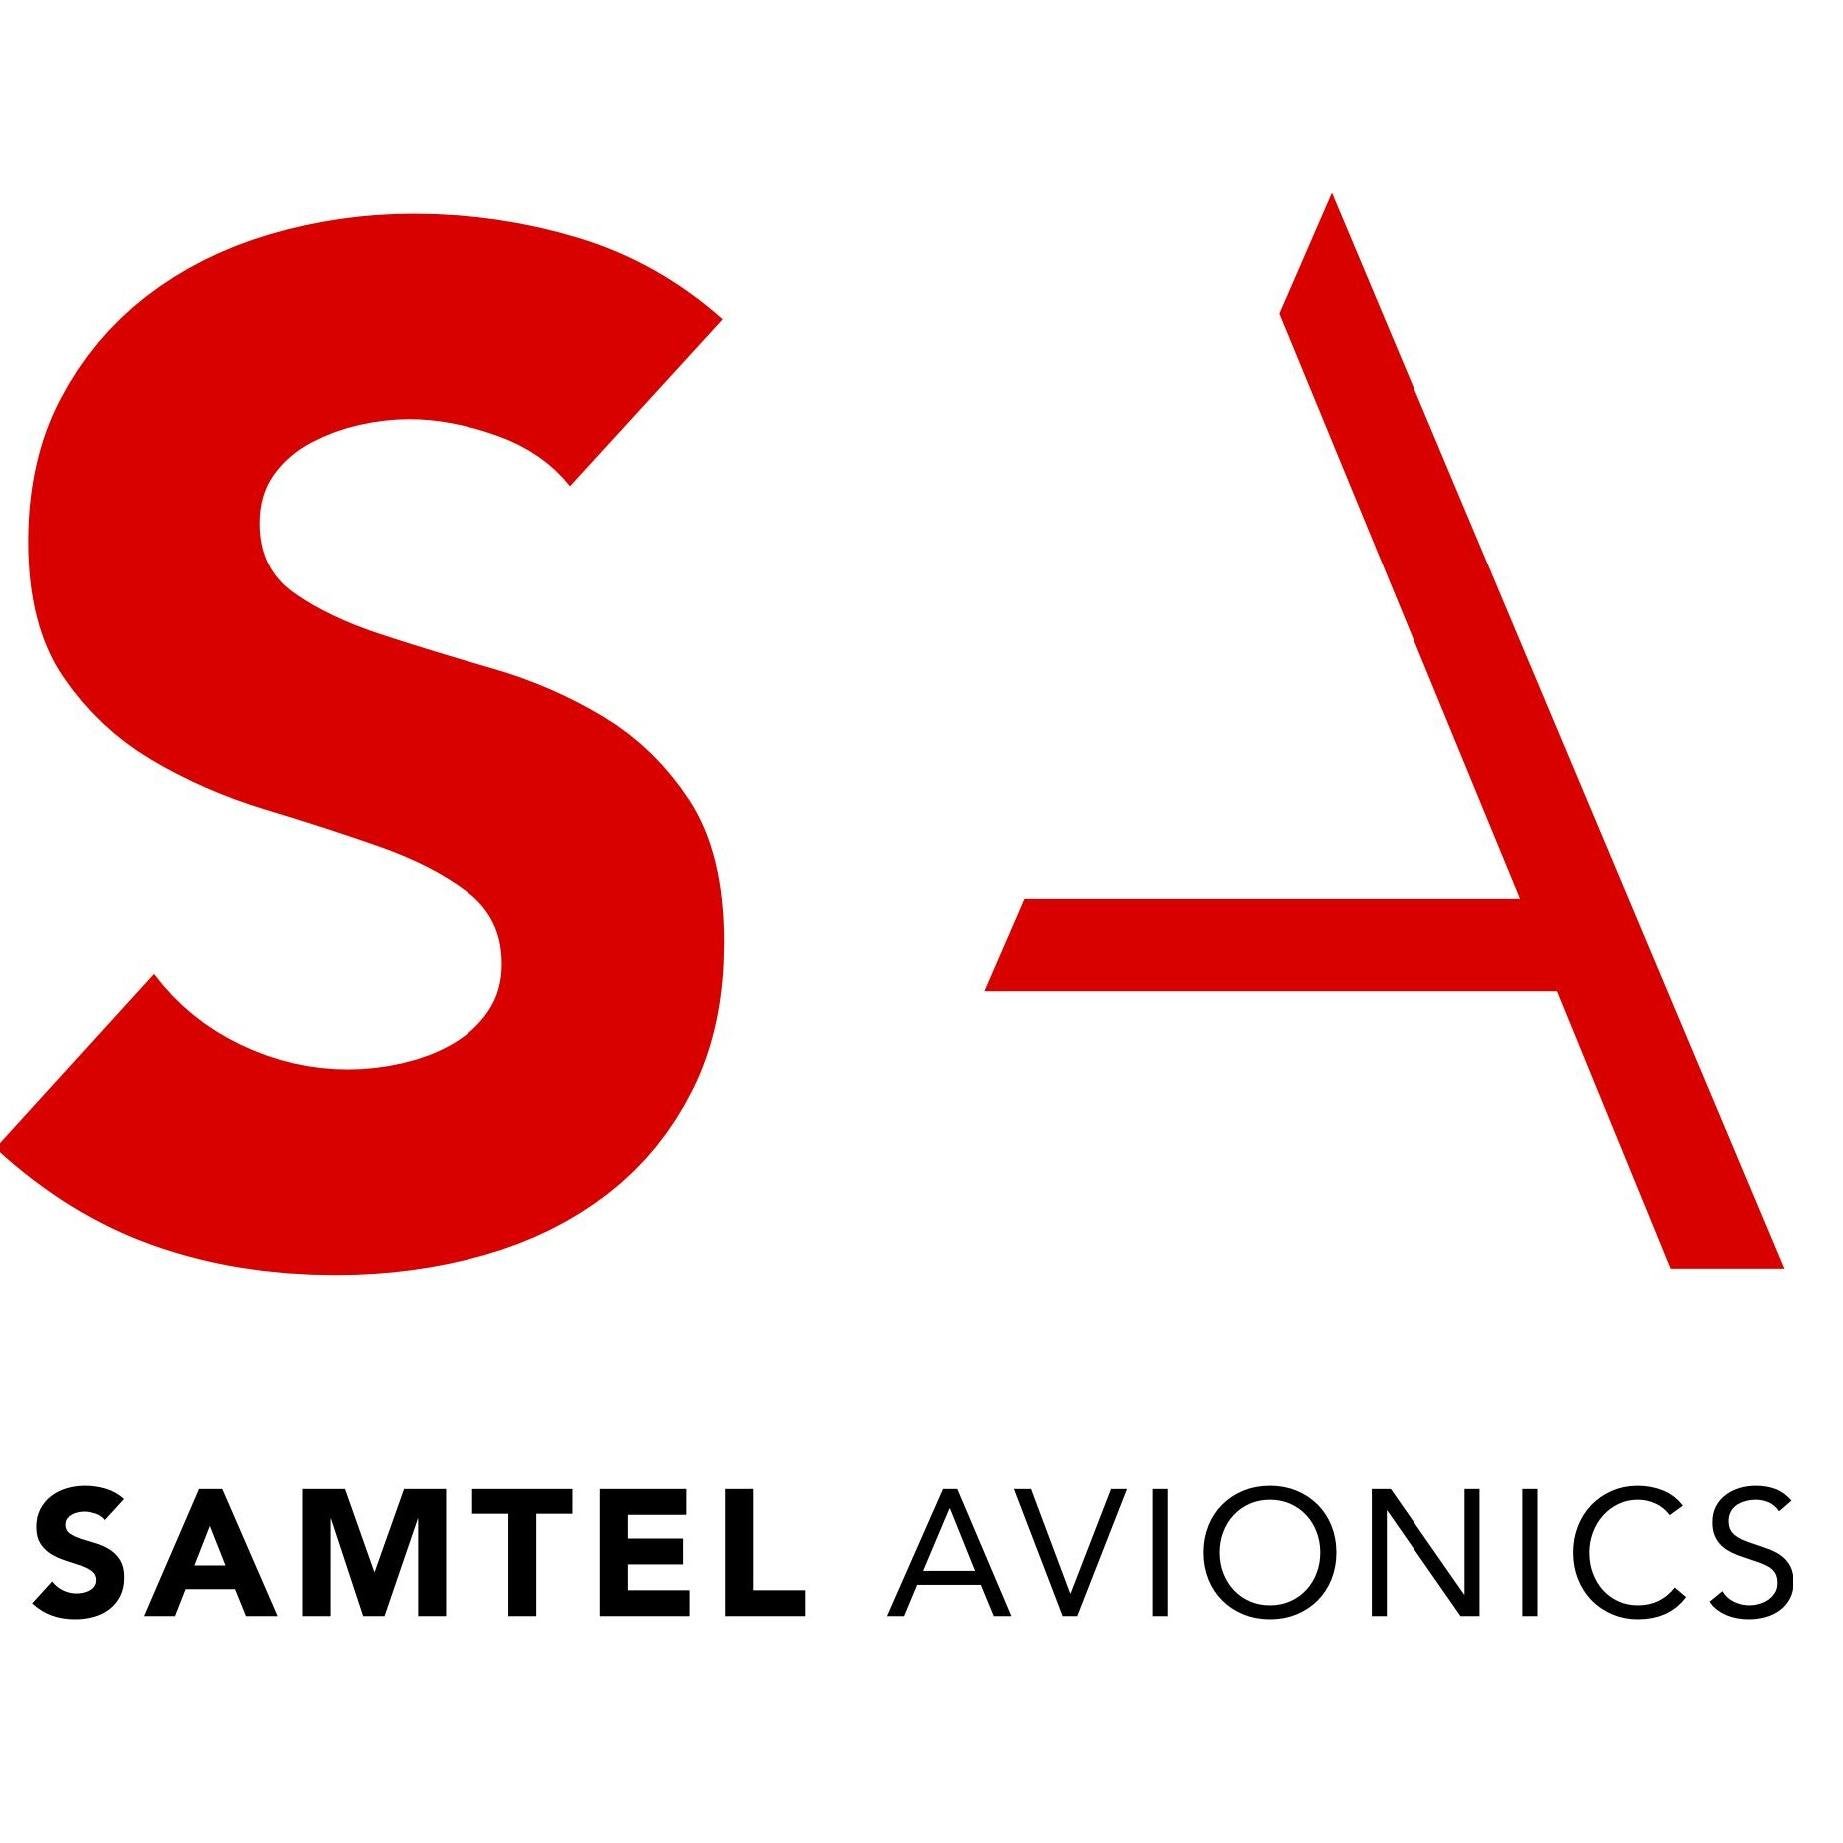 Samtel Avionics (SA) is a key Indian player in high-technology products for avionics & military applications.